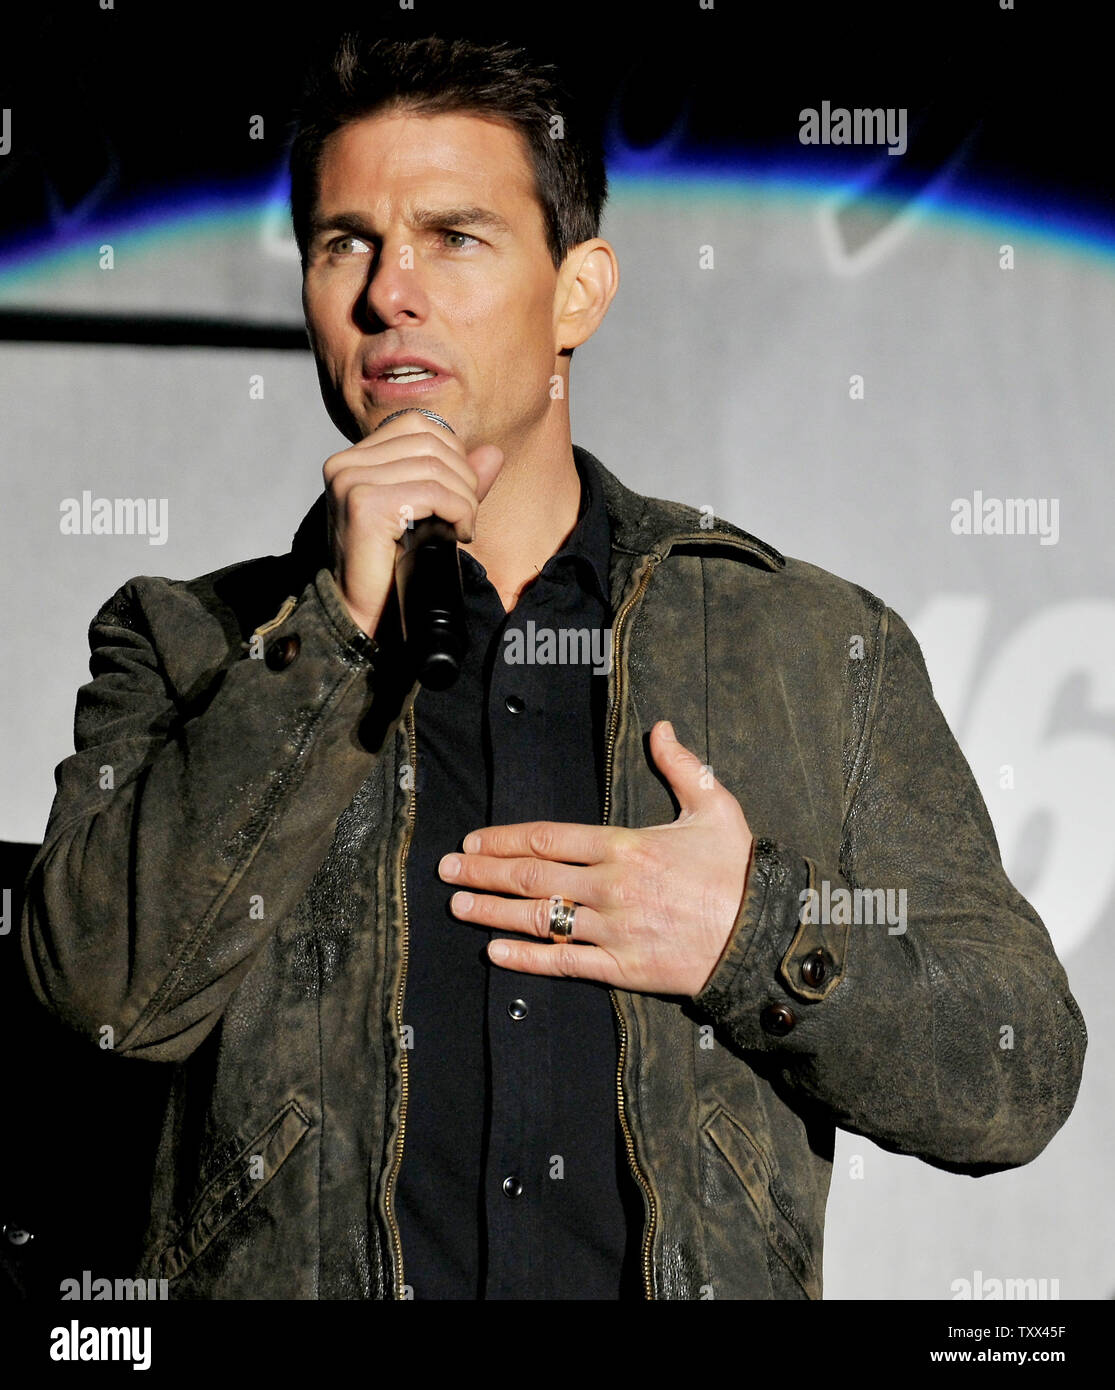 Actor Tom Cruise attends the Japan premiere for the film 'Mission:Impossible - Ghost Protocol' in Tokyo, Japan, on December 1, 2011. Tom stayed in Japan for 24 hours.     UPI/Keizo Mori Stock Photo